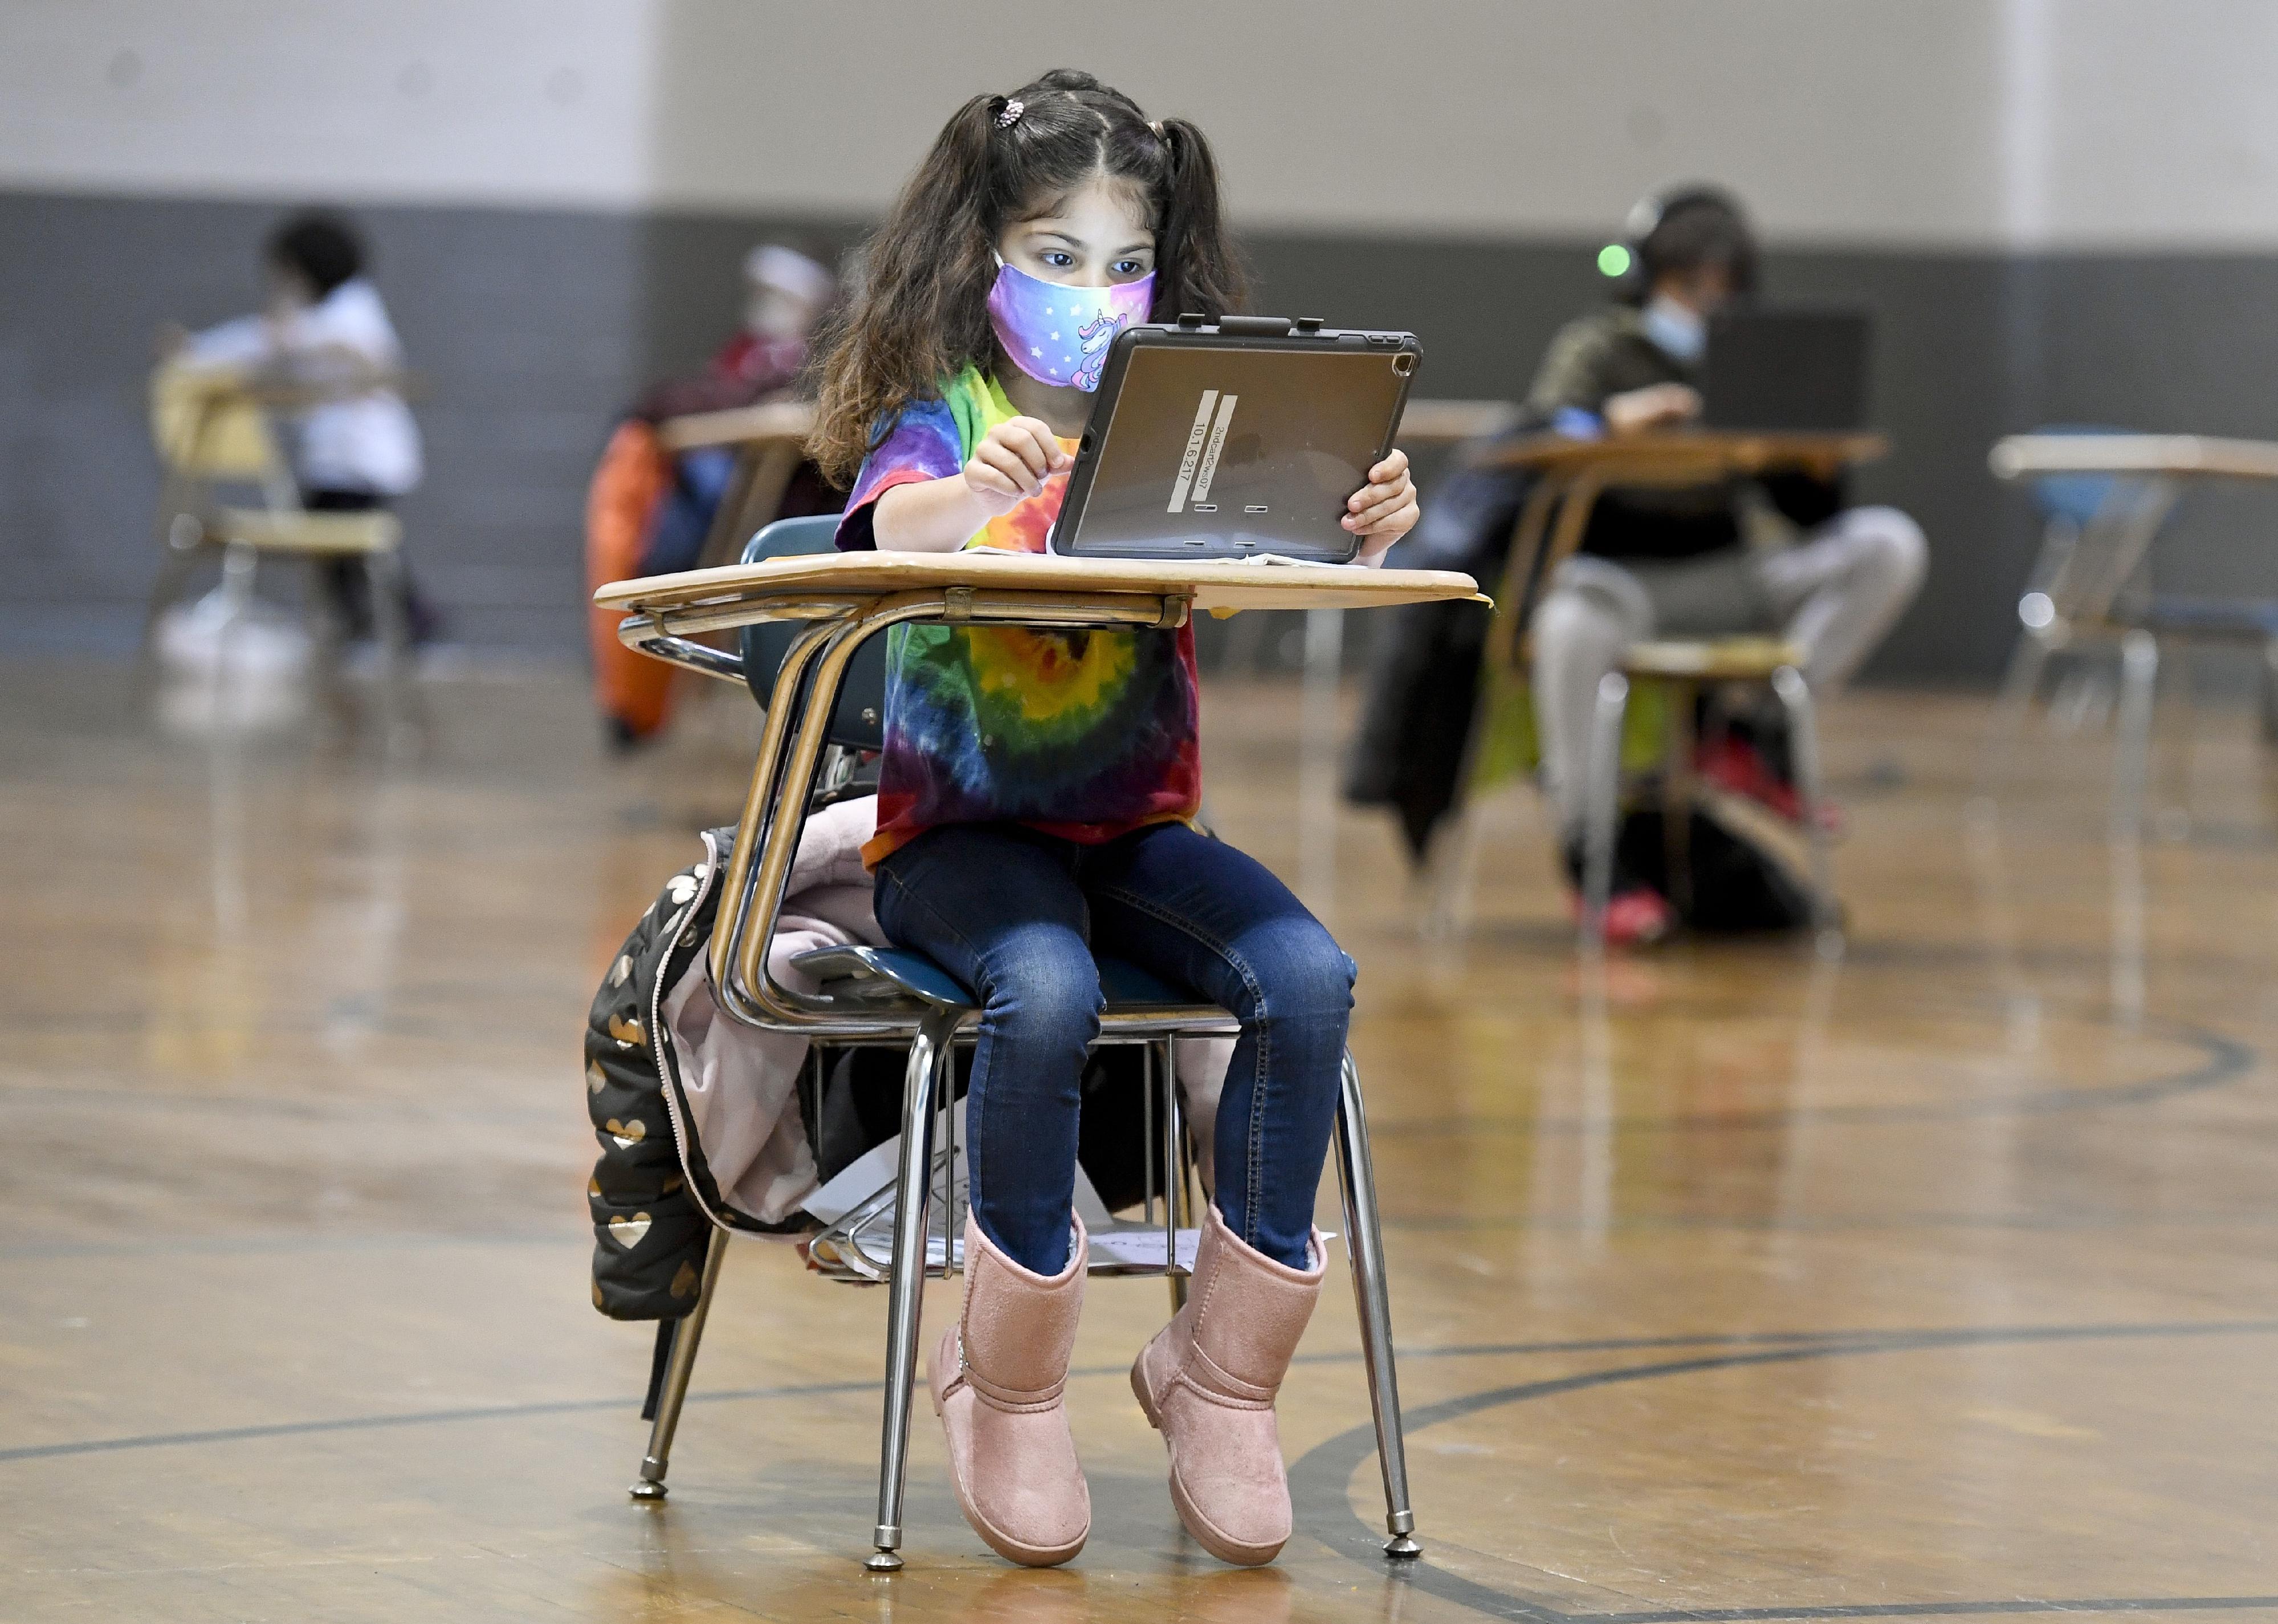 A young student sitting at a desk distanced from her classmates in the gym.